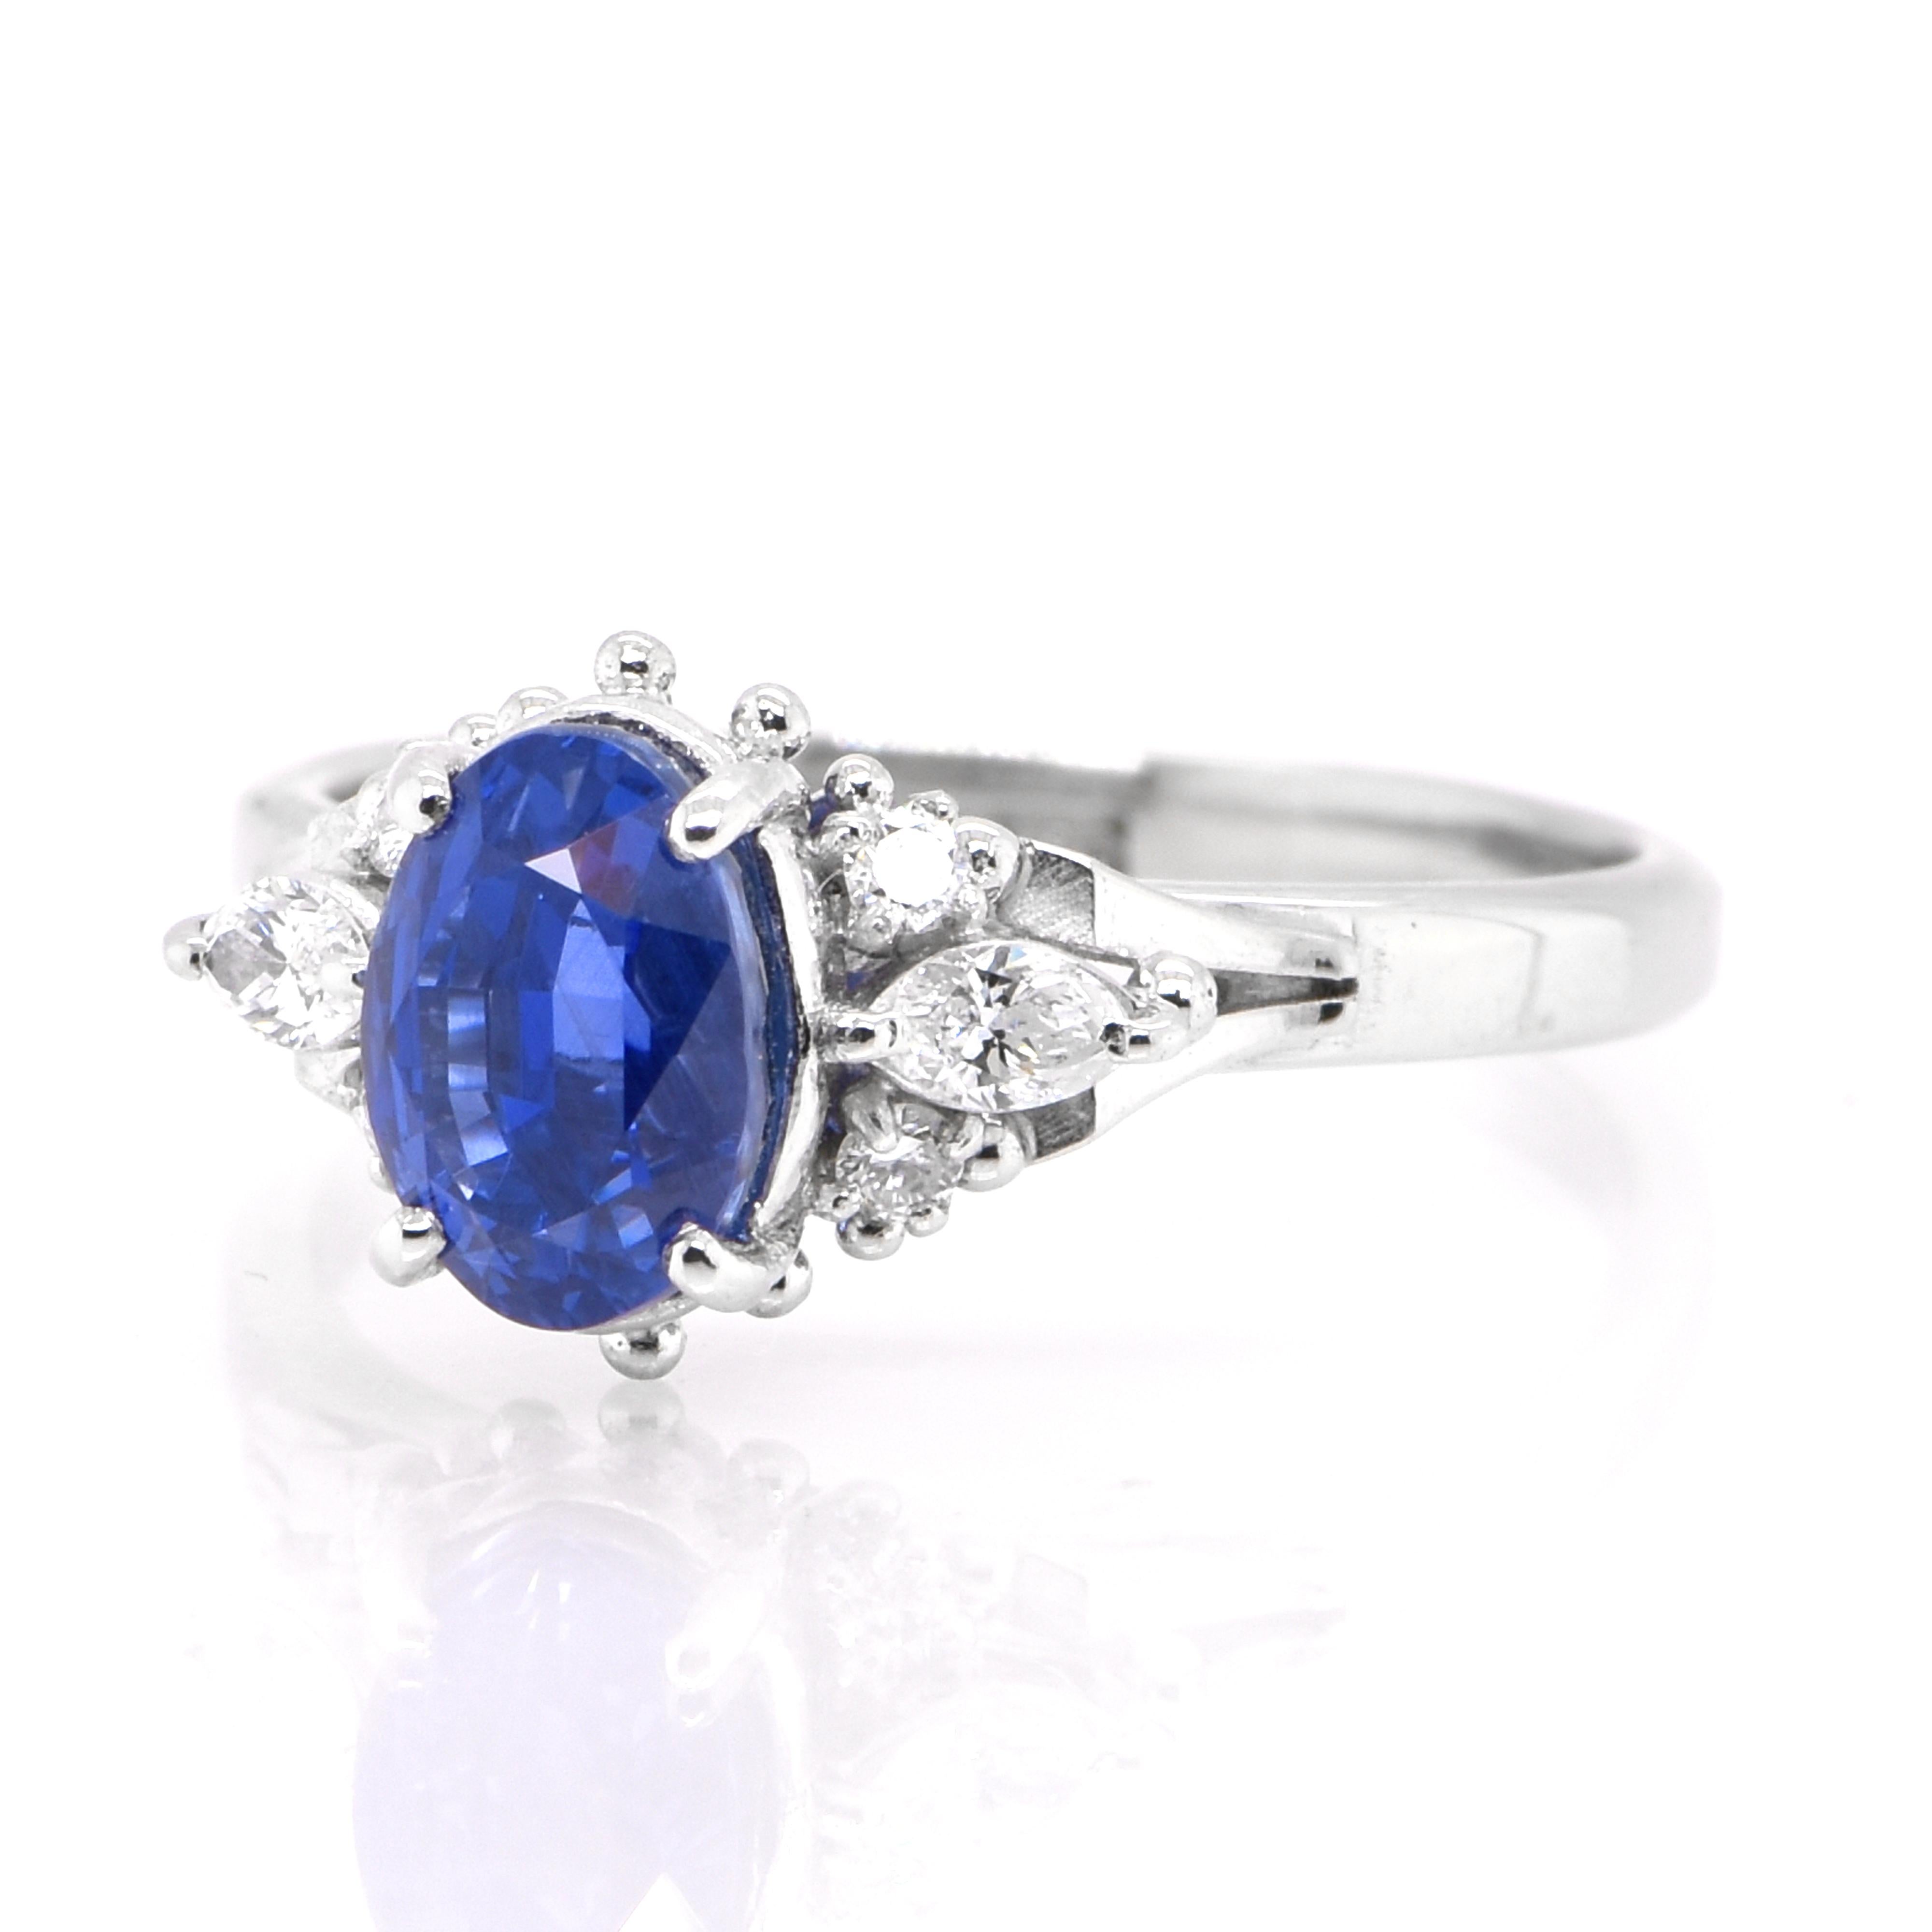 A beautiful ring featuring GIA Certified 2.82 Carat Natural Unheated, Ceylon (Sri Lankan) Sapphire and 0.20 Carats Diamond Accents set in Platinum. Sapphires have extraordinary durability - they excel in hardness as well as toughness and durability